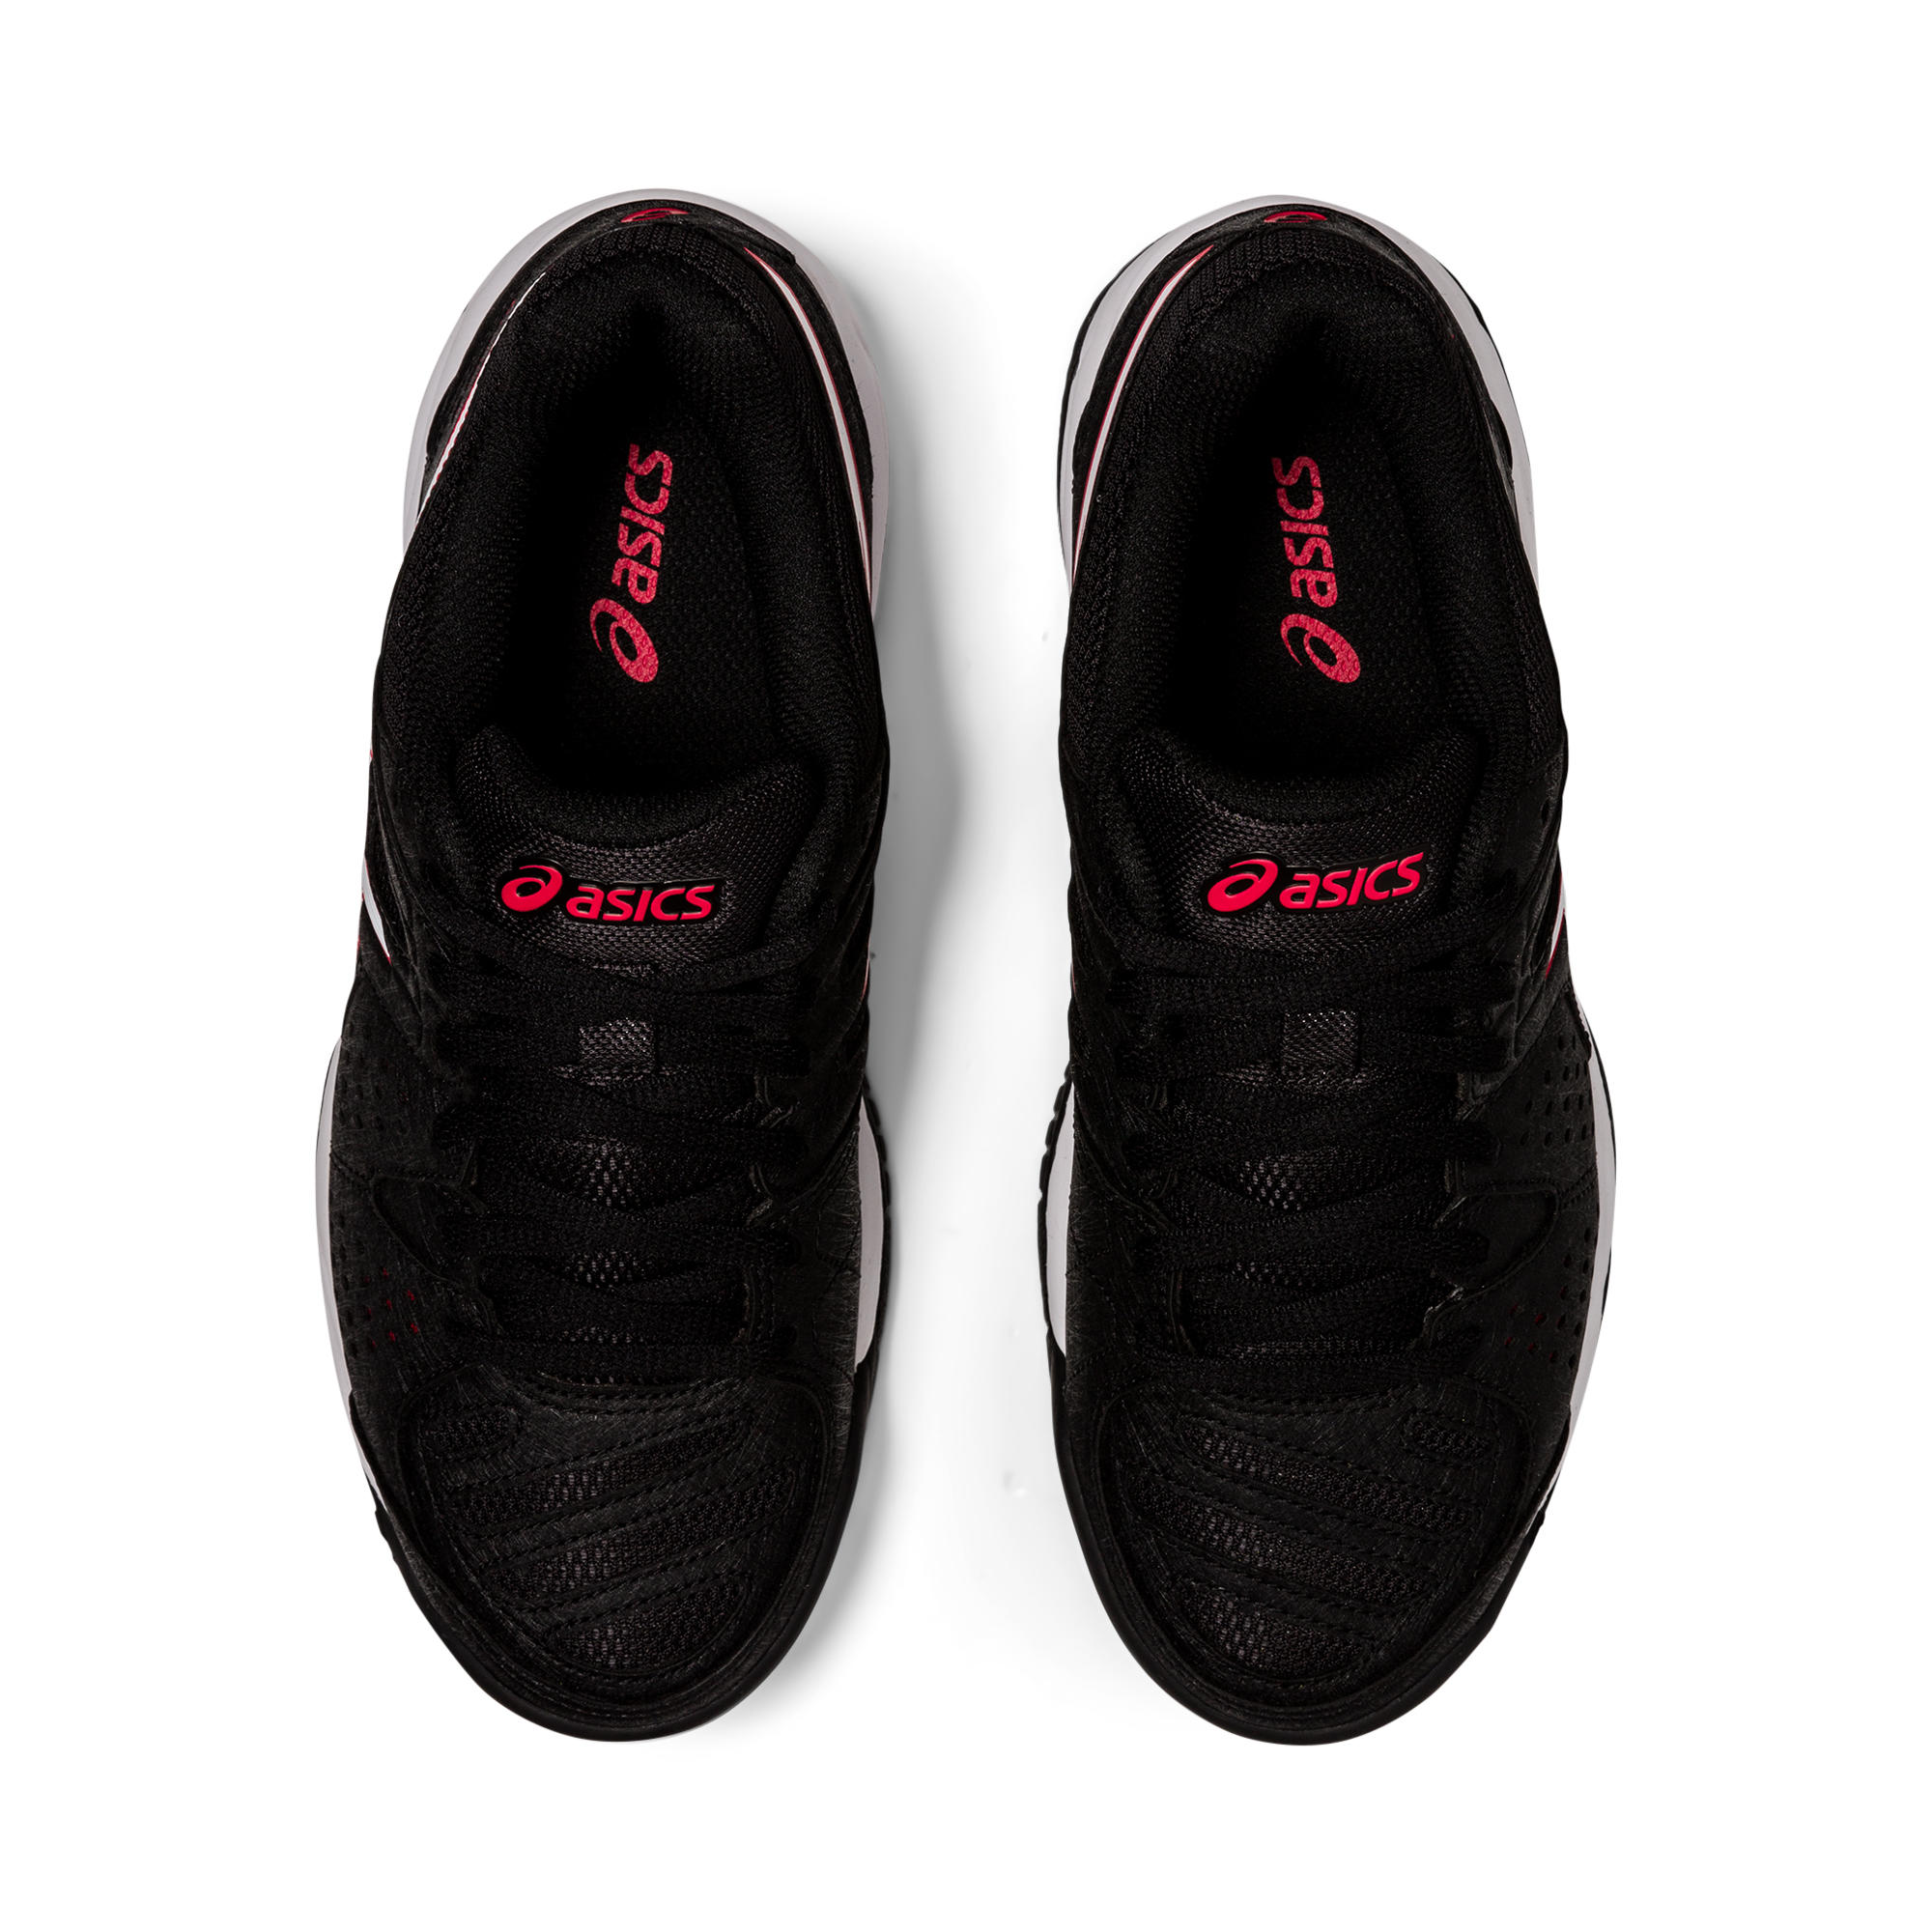 Kids' Tennis Shoes Rally - Black/Red 4/6